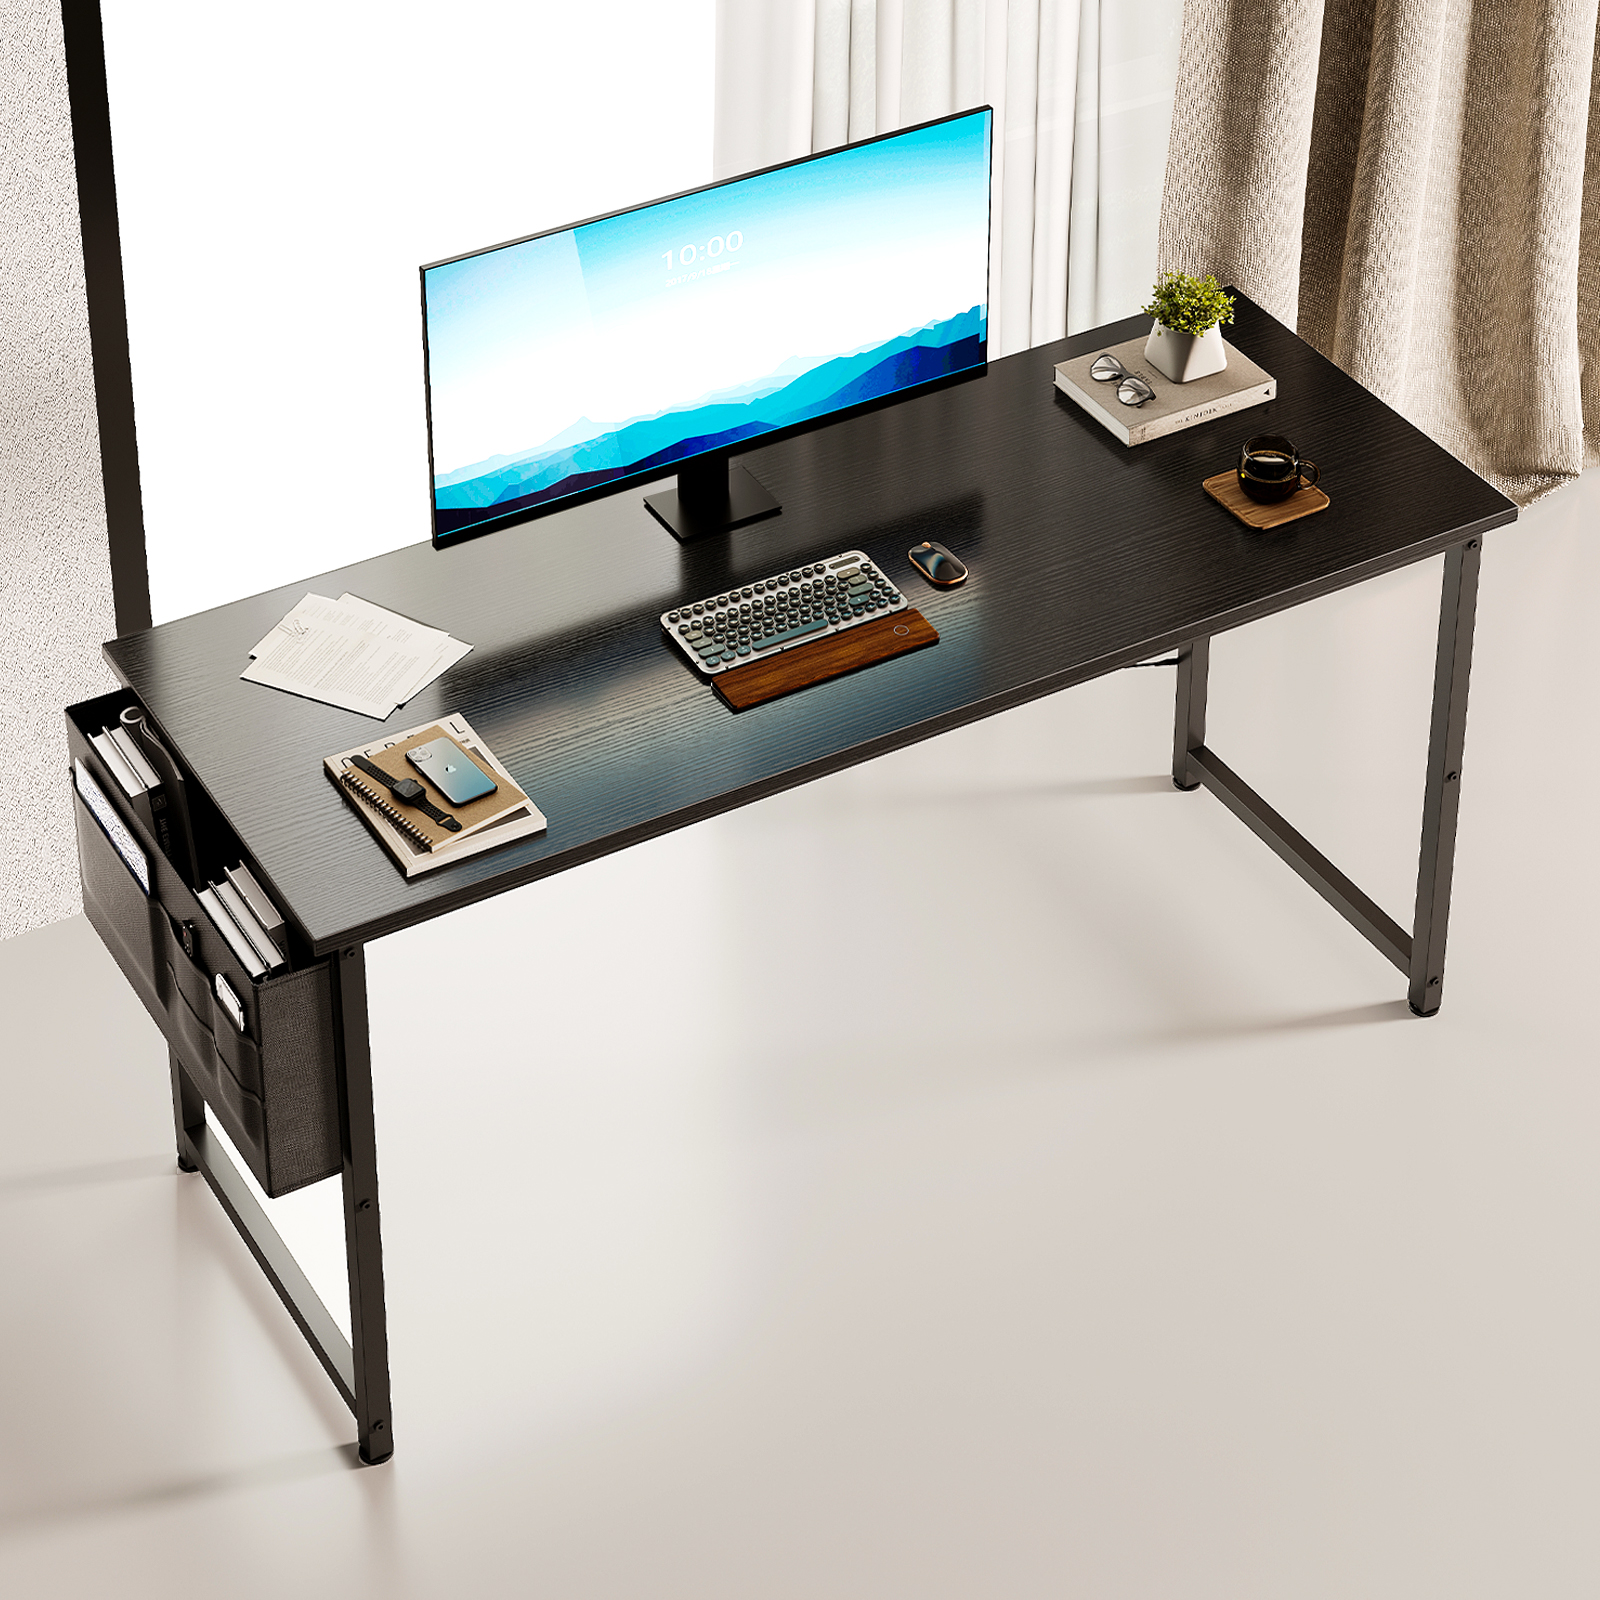 63 inch Computer Desk with Storage Bag, Modern Simple Style Desk for Home Office, Large Study Student Writing Desk, Black - image 1 of 5